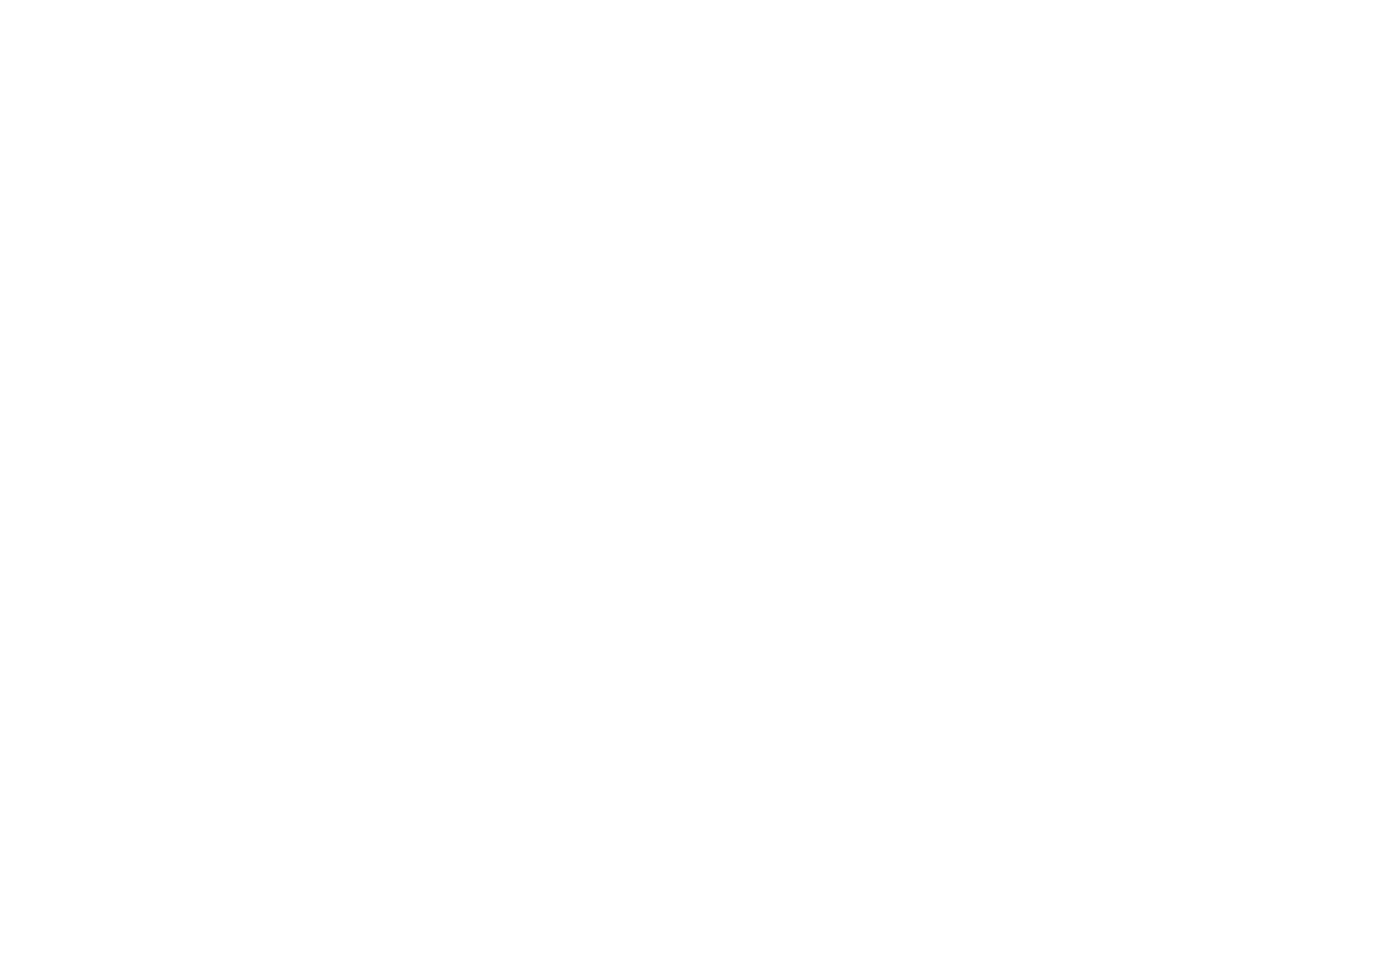 Architectural Drawing Blueprint Plan Fasade house section Technical Drawings graphic architectural graphic residental living underground parking parking Unit residential complex